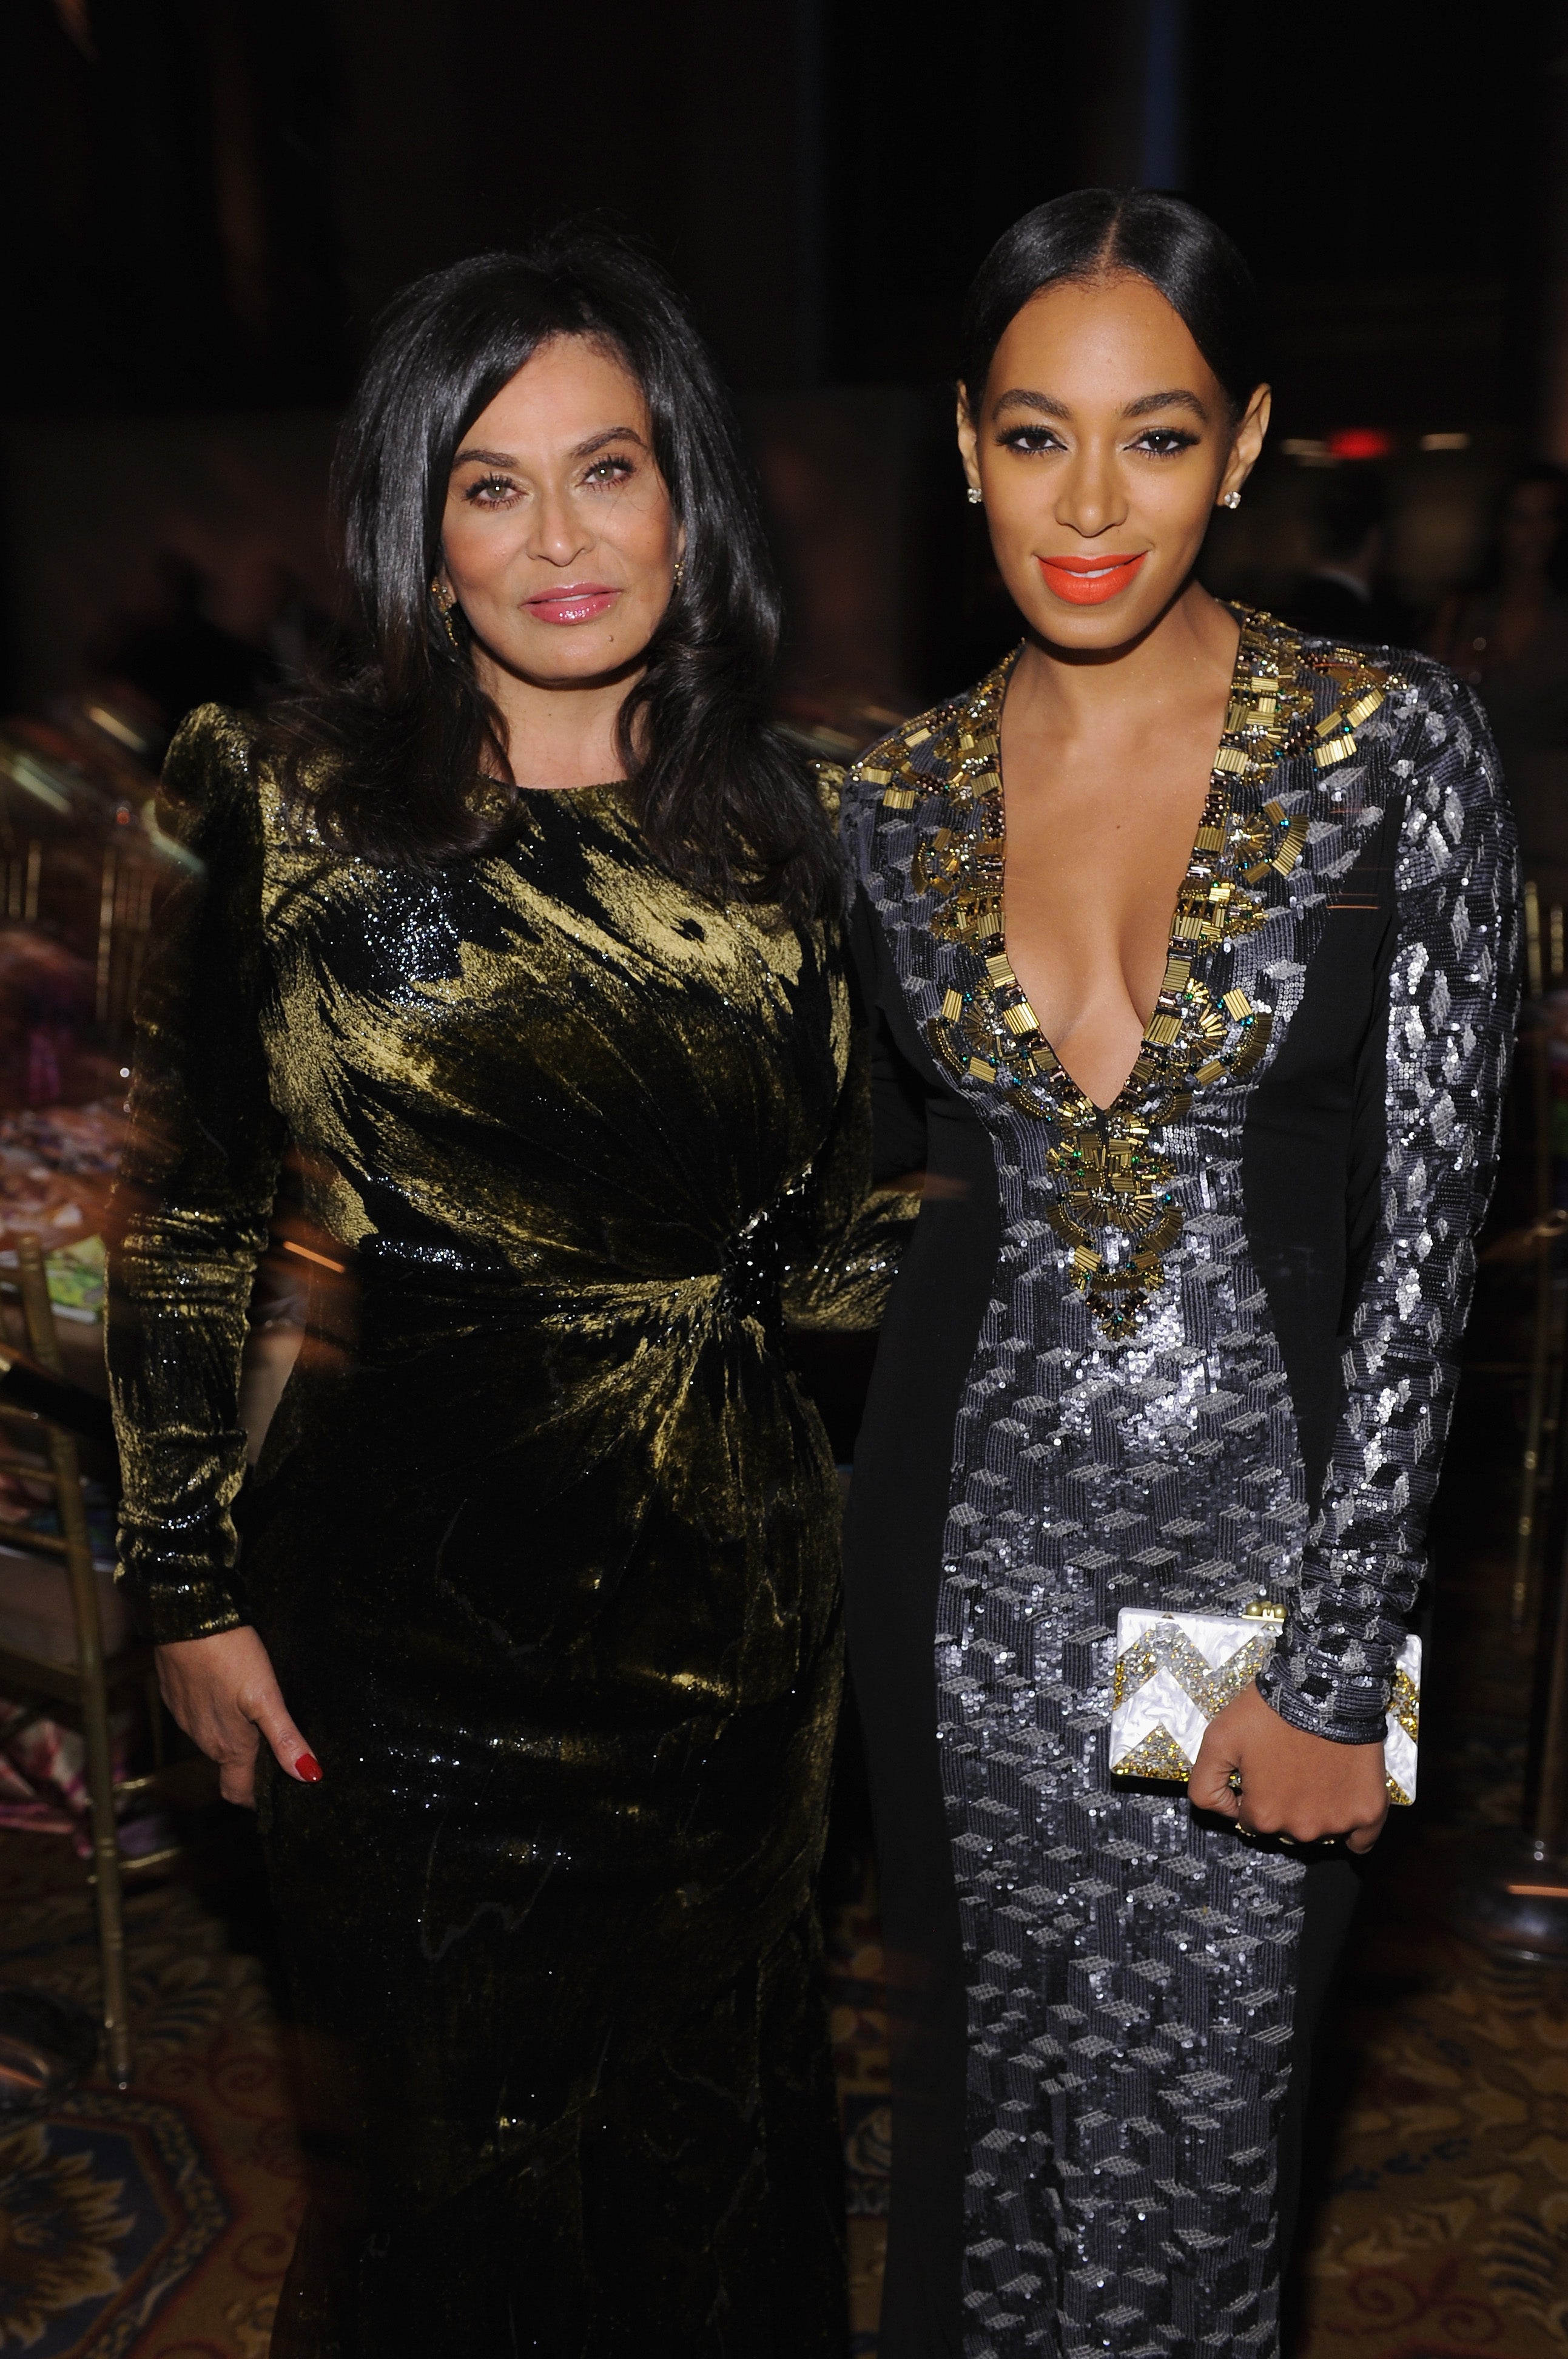 Solange Tops The Charts With Her New Album And Mom Tina Lawson Is Her Biggest Fan
